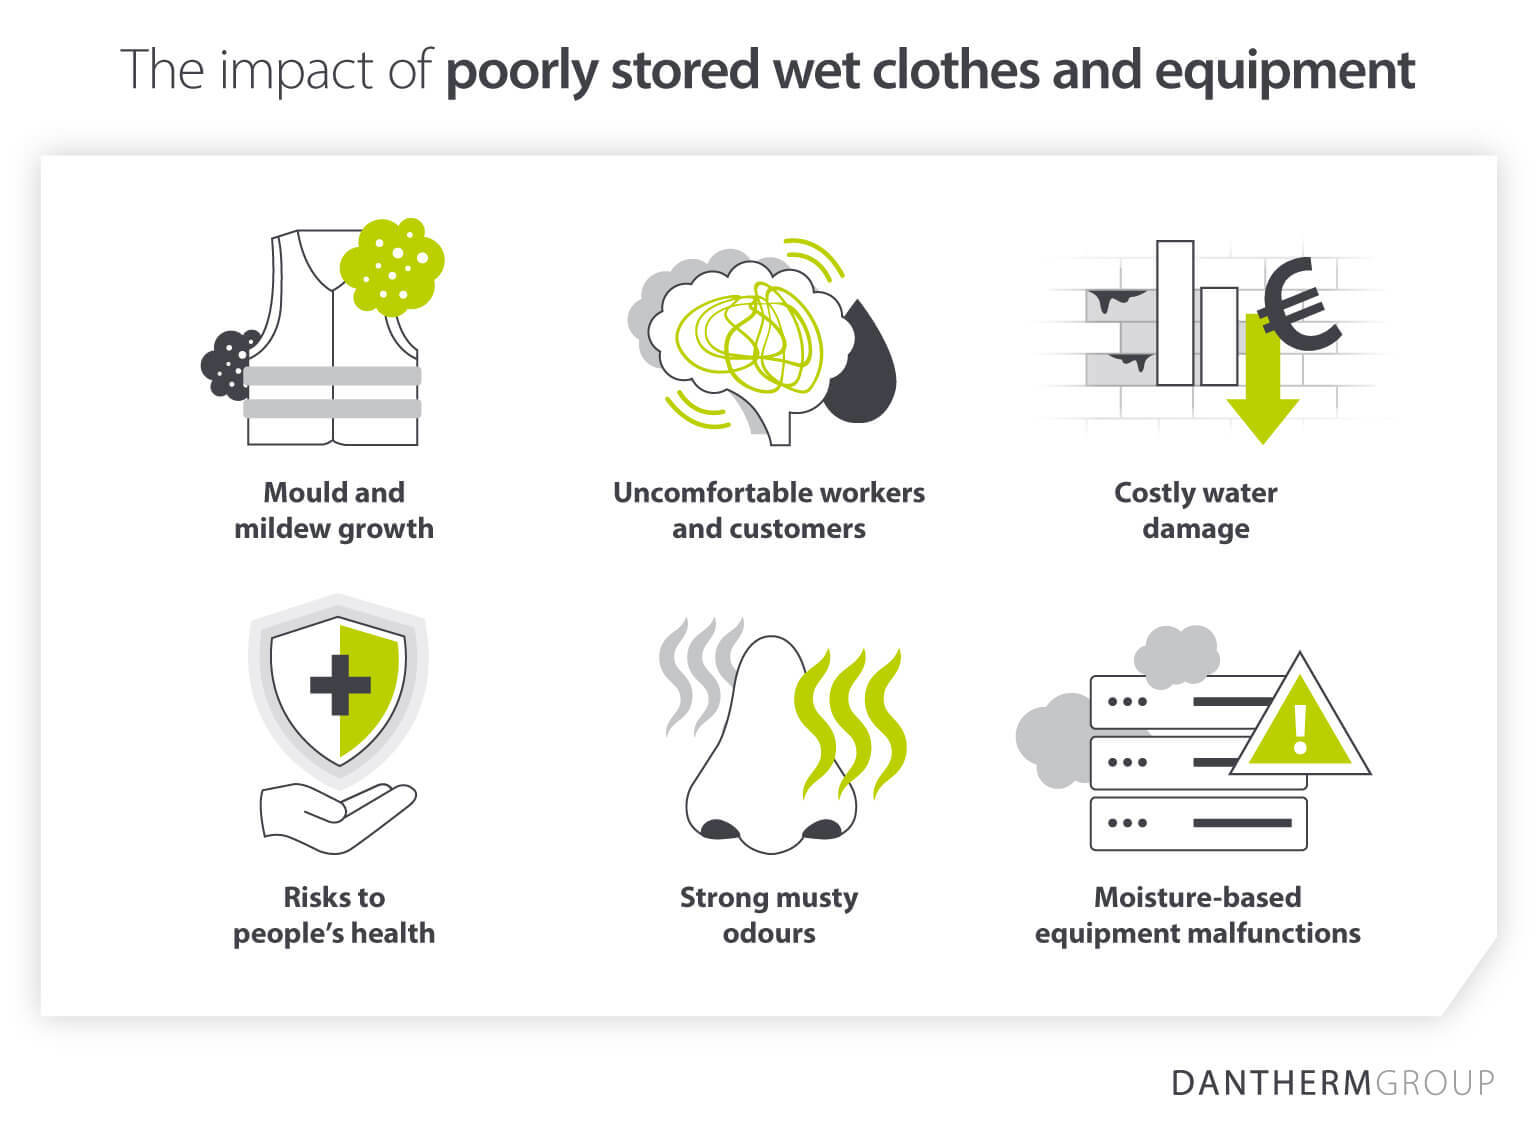 The impact of poorly stored wet clothes and equipment